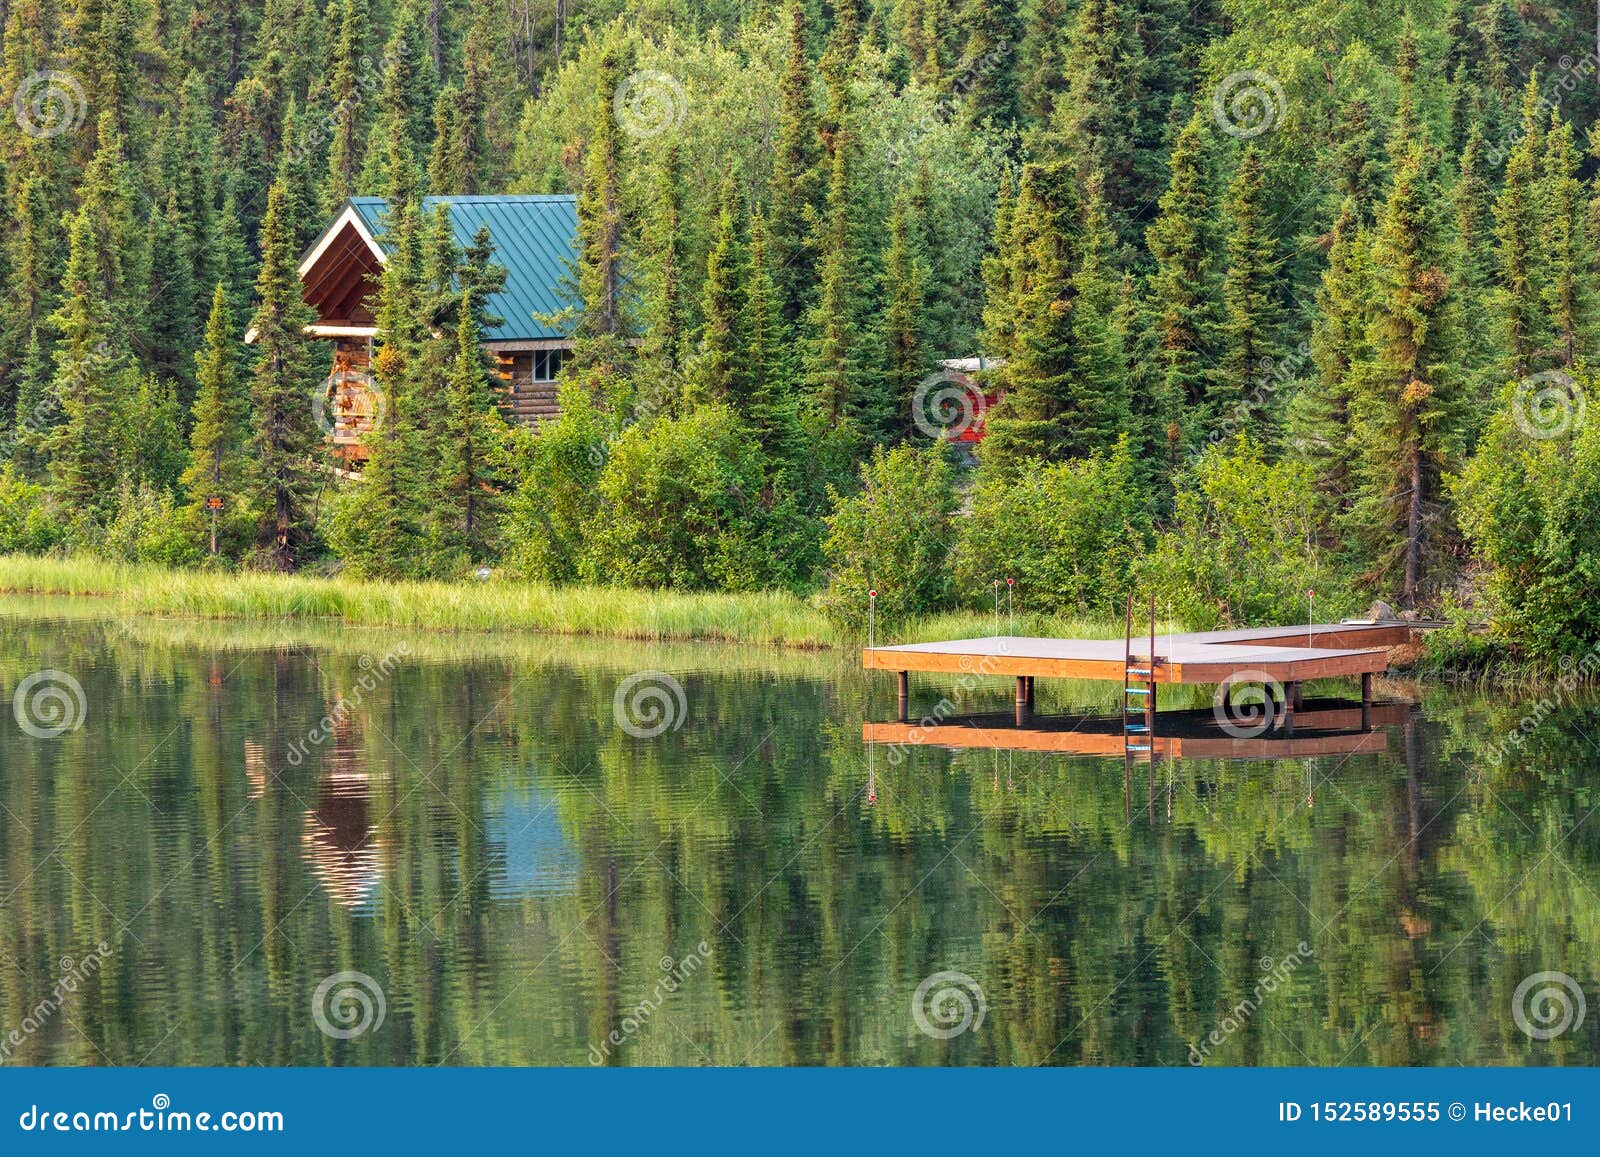 pen Monarchy Uplifted Lonely Log Cabin by the Lake in Canada Stock Image - Image of building,  forest: 152589555